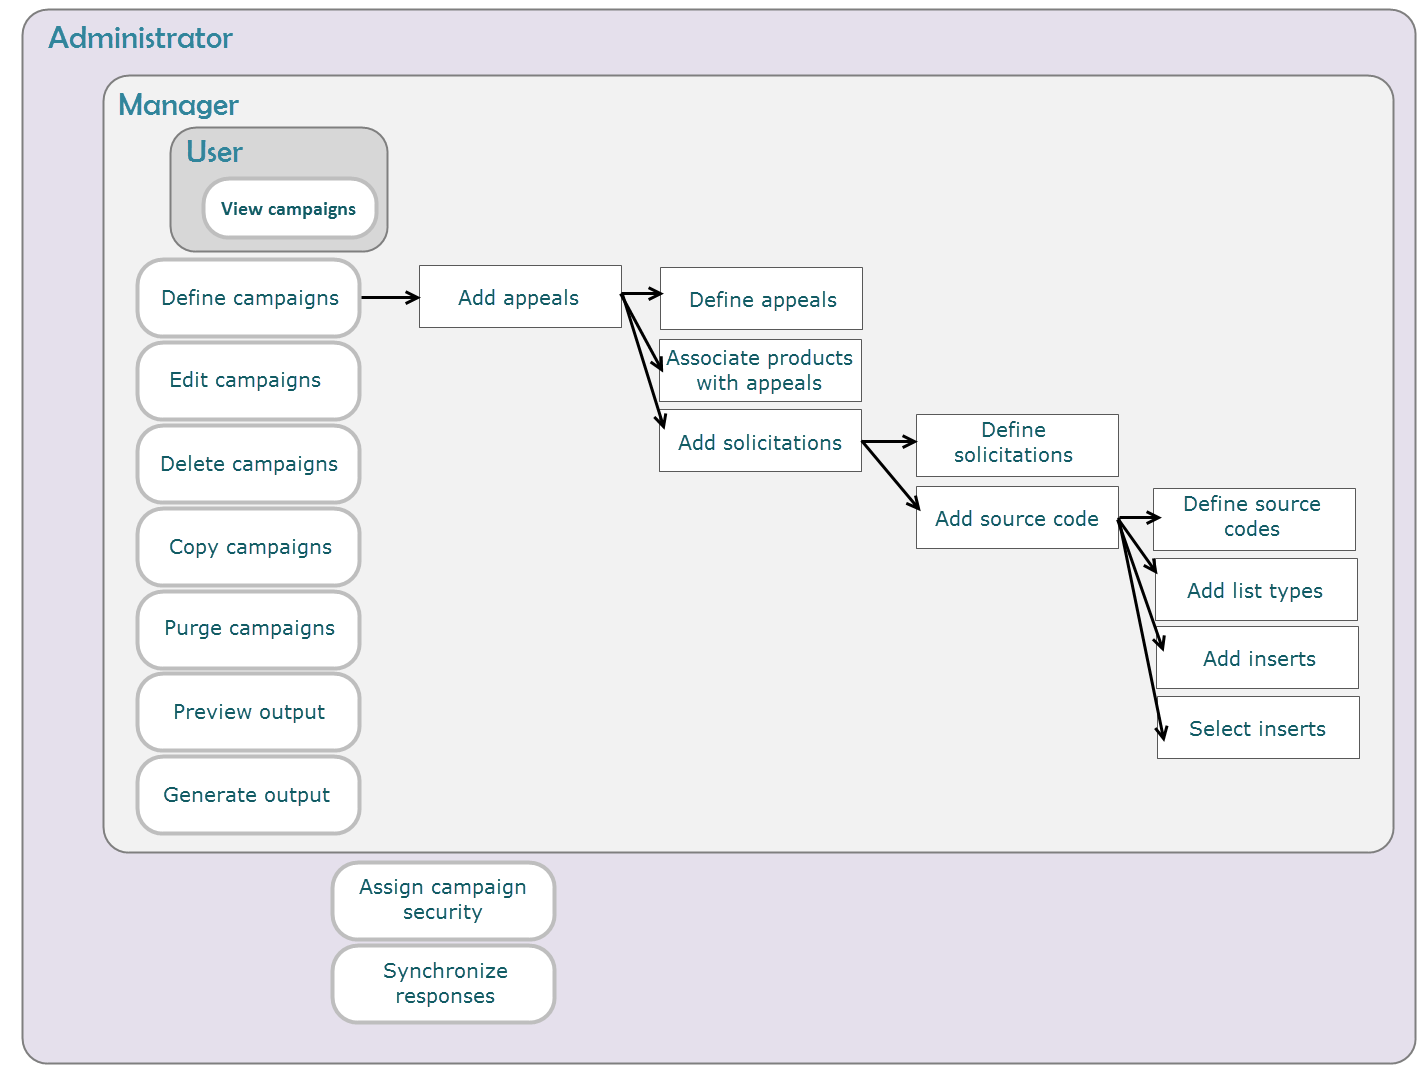 Flowchart detailing the hierarchy and access levels of campaign security groups within a marketing software interface. It outlines three main roles: CampaignAdmin with full control access, CampaignMgr with read, add, edit, and delete permissions, and CampaignUser with read-only access. The chart visually represents the permissions each role has over the Campaign functionality, emphasizing the structured approach to campaign management security.